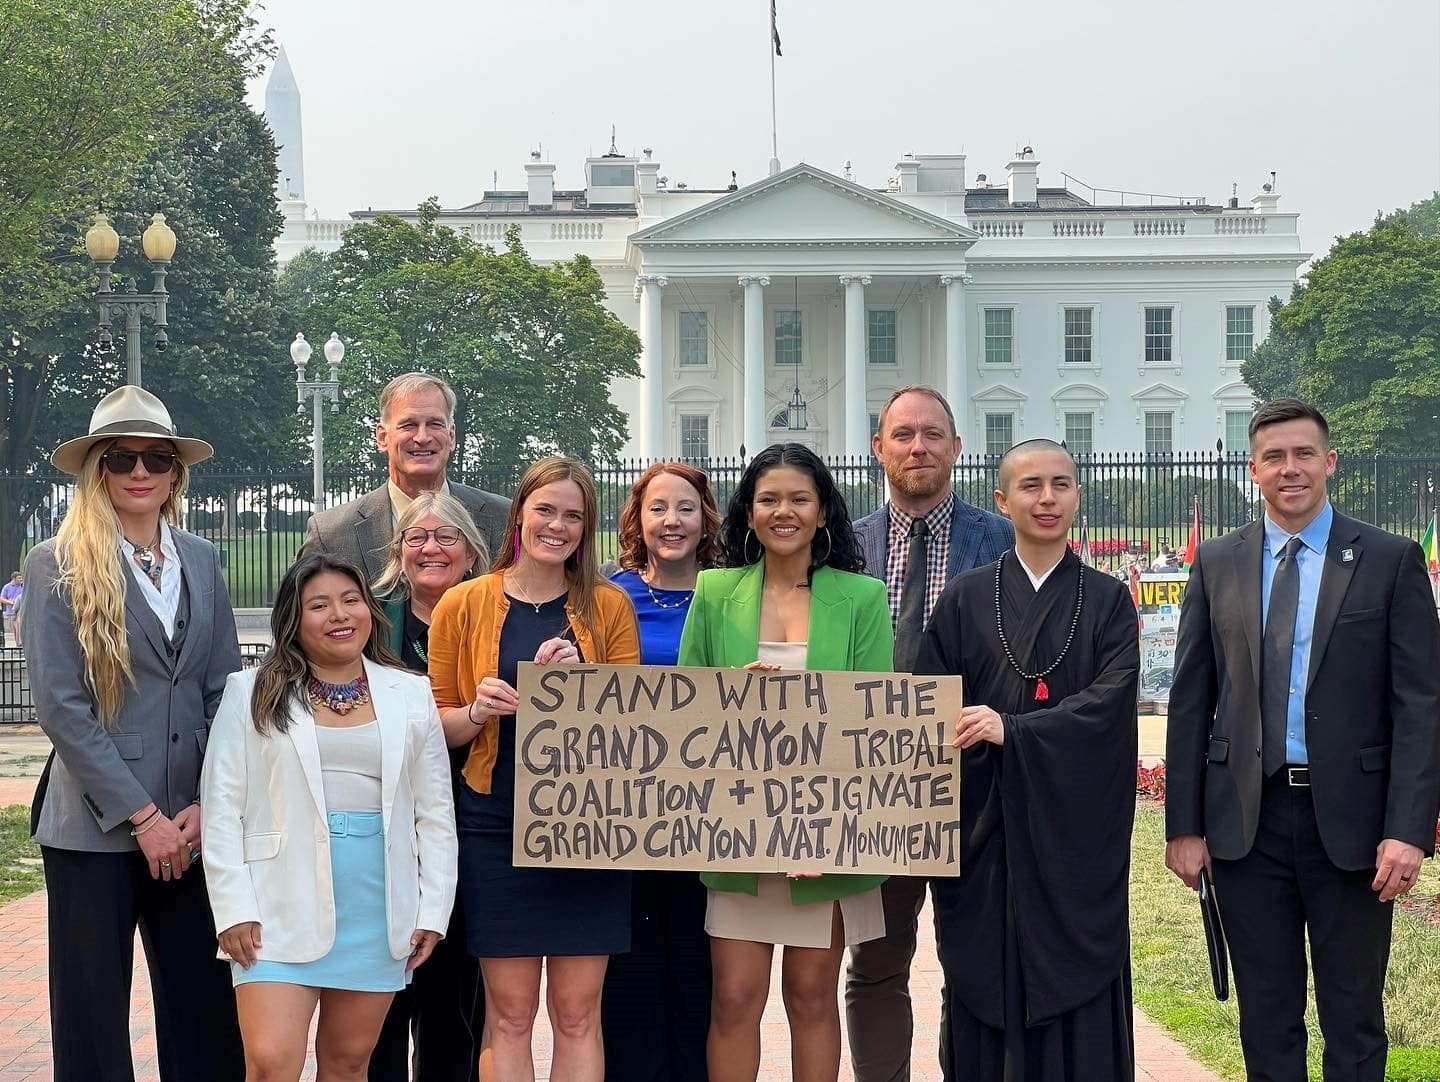 A group of people stand in front of the While House with a sign reading, "Stand with the Grand Canyon Tribal Coalition + designate Grand Canyon Nat. Monument